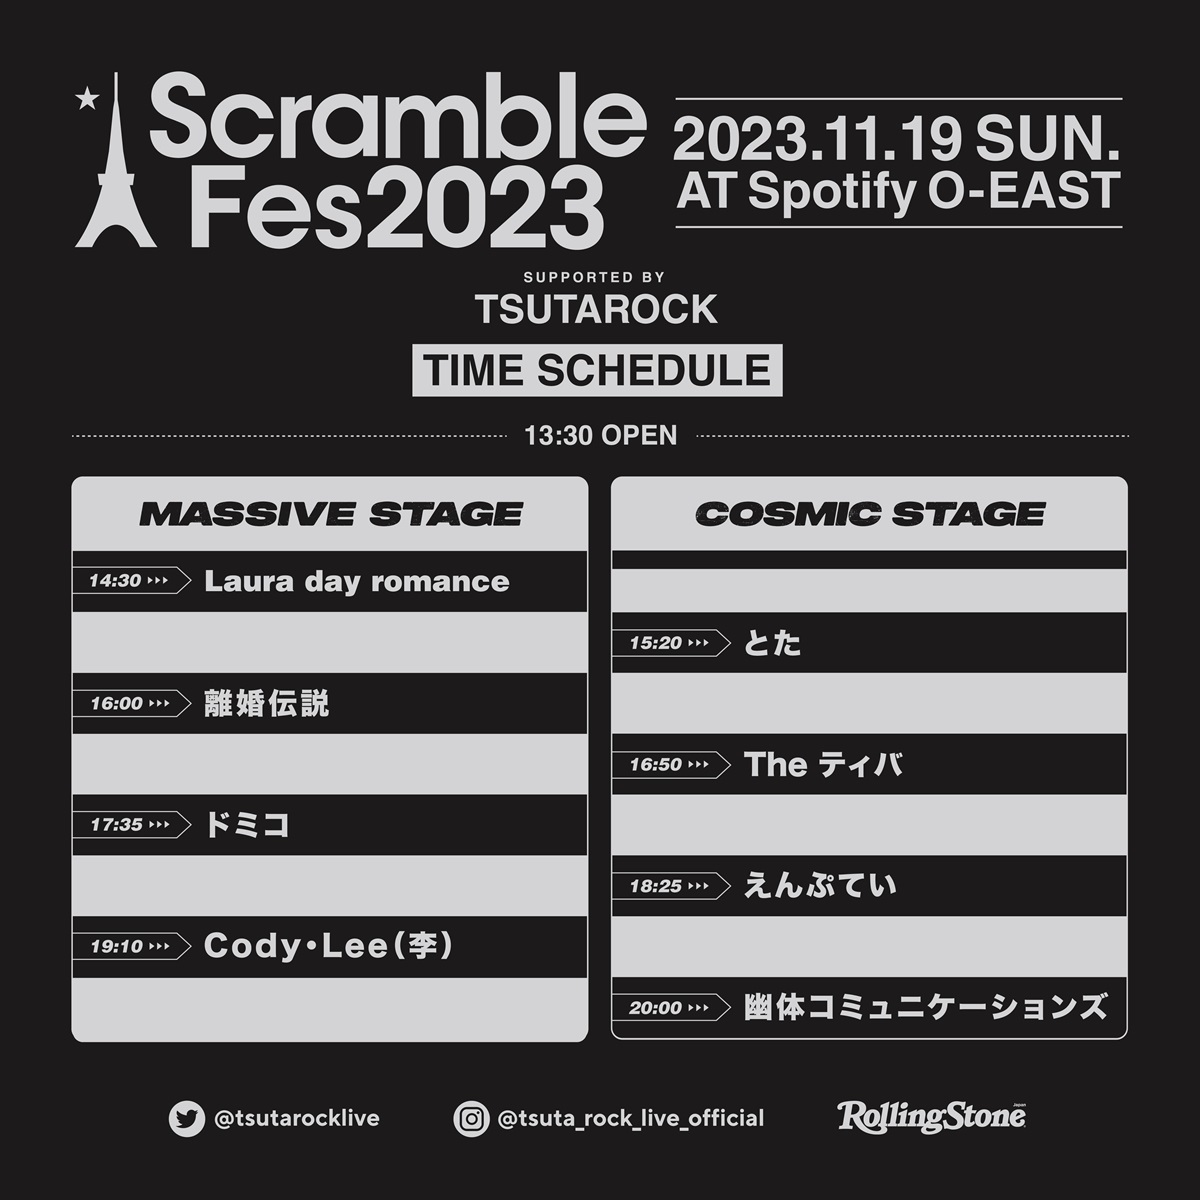 Scramble Fes 2023 supported by TSUTAROCK